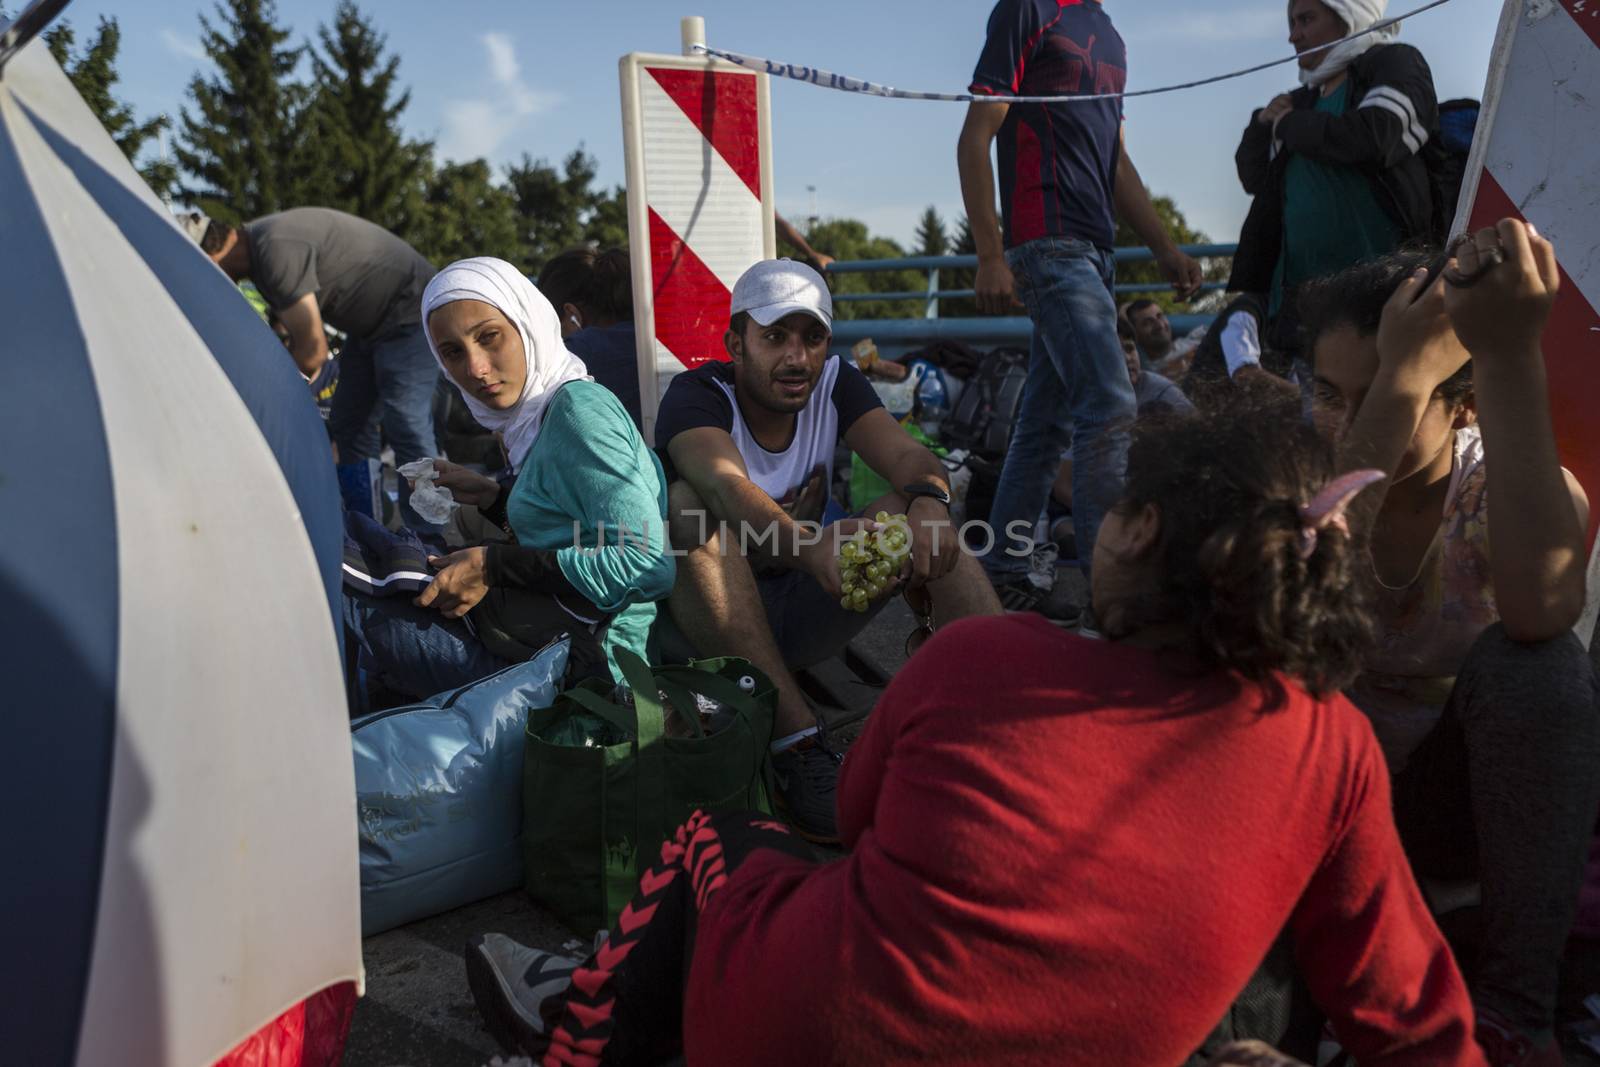 CROATIA, Harmica: Refugees sit and wait on a bridge in the village of Harmica, Croatia on the border of Slovenia on September 19, 2015, after the Slovenian government blocked refugees from entering the country with riot police. Slovenia is the latest country to be forced into action over the global refugee crisis, with Slovenia's ambassador to Germany telling the Rheinische Post newspaper they will accept 'up to 10, 000' refugees